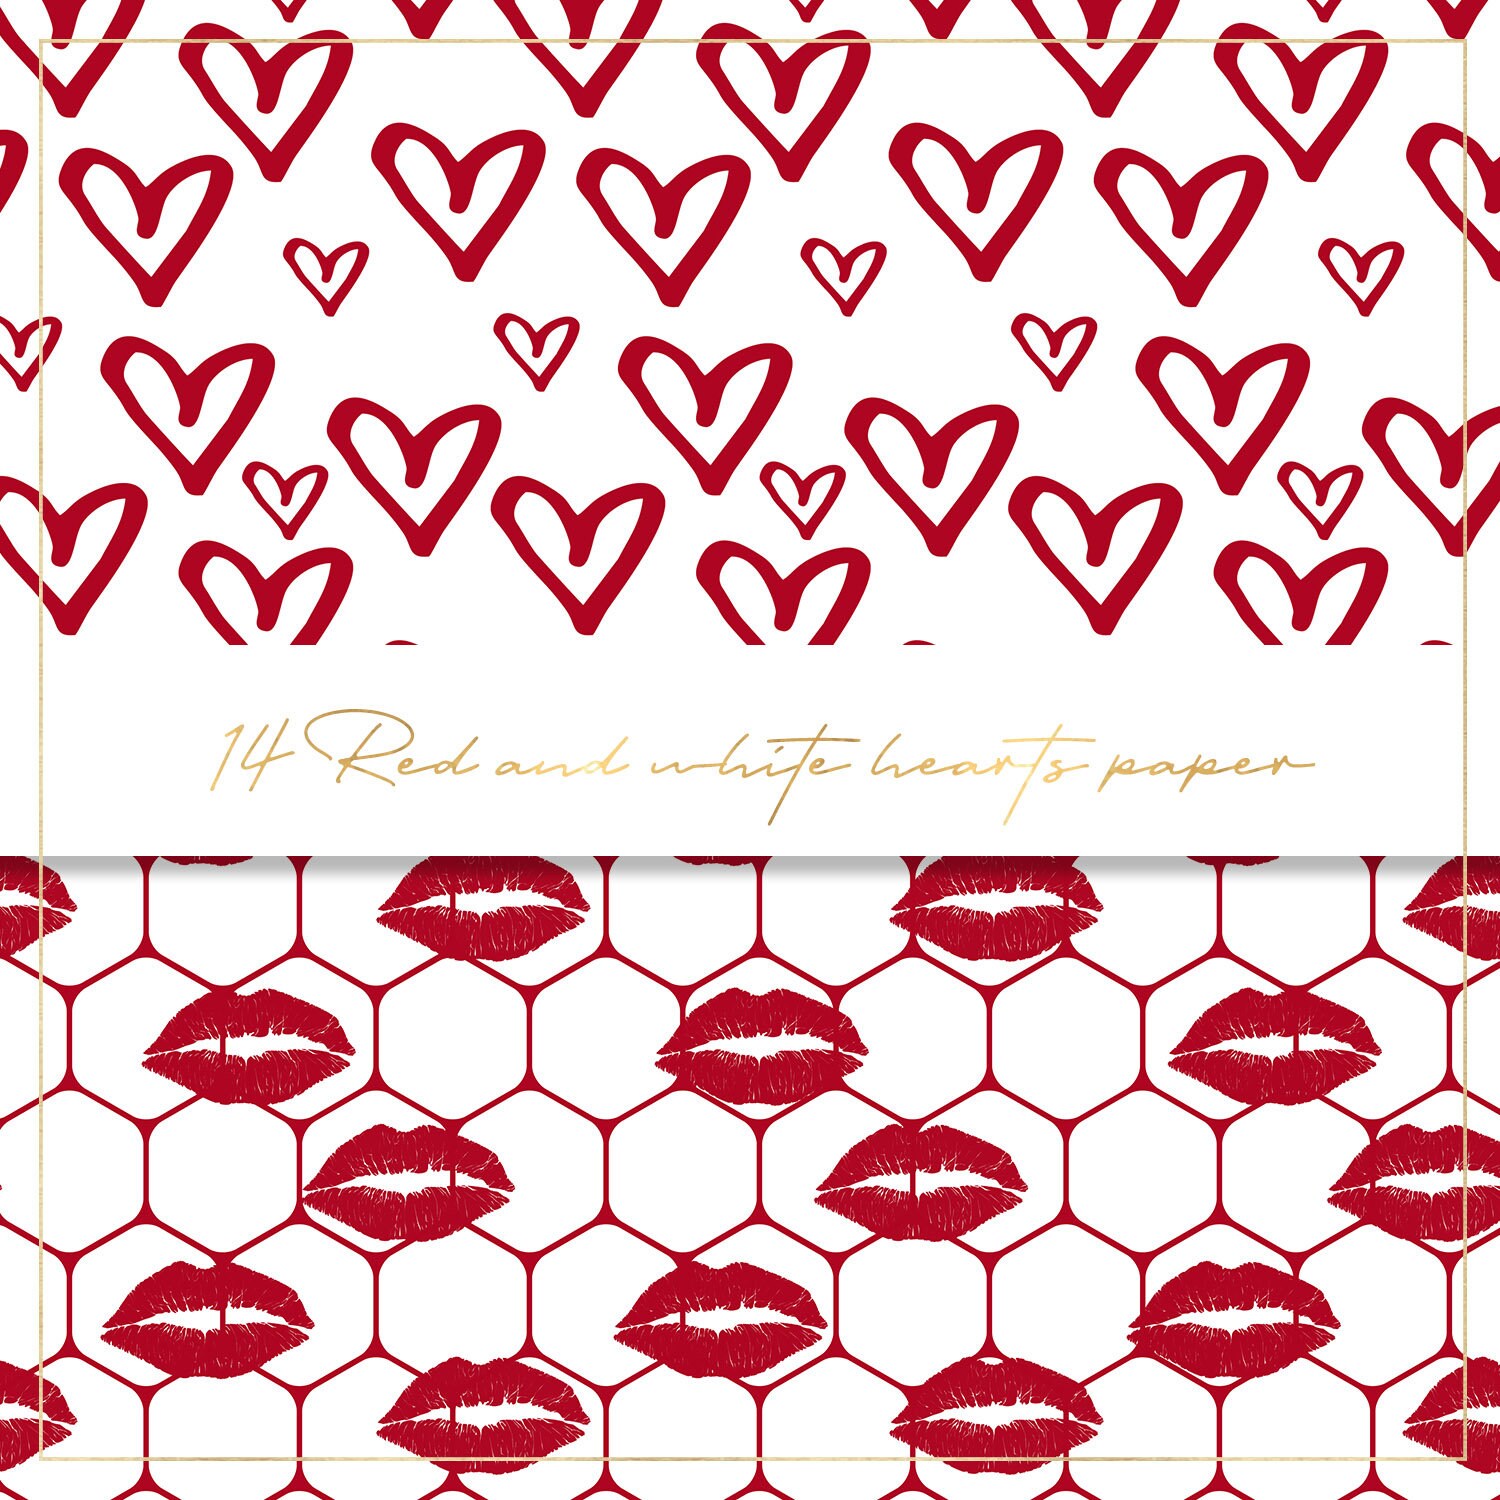 Red and White Hearts Digital Paper, Seamless Pattern, Valentine's